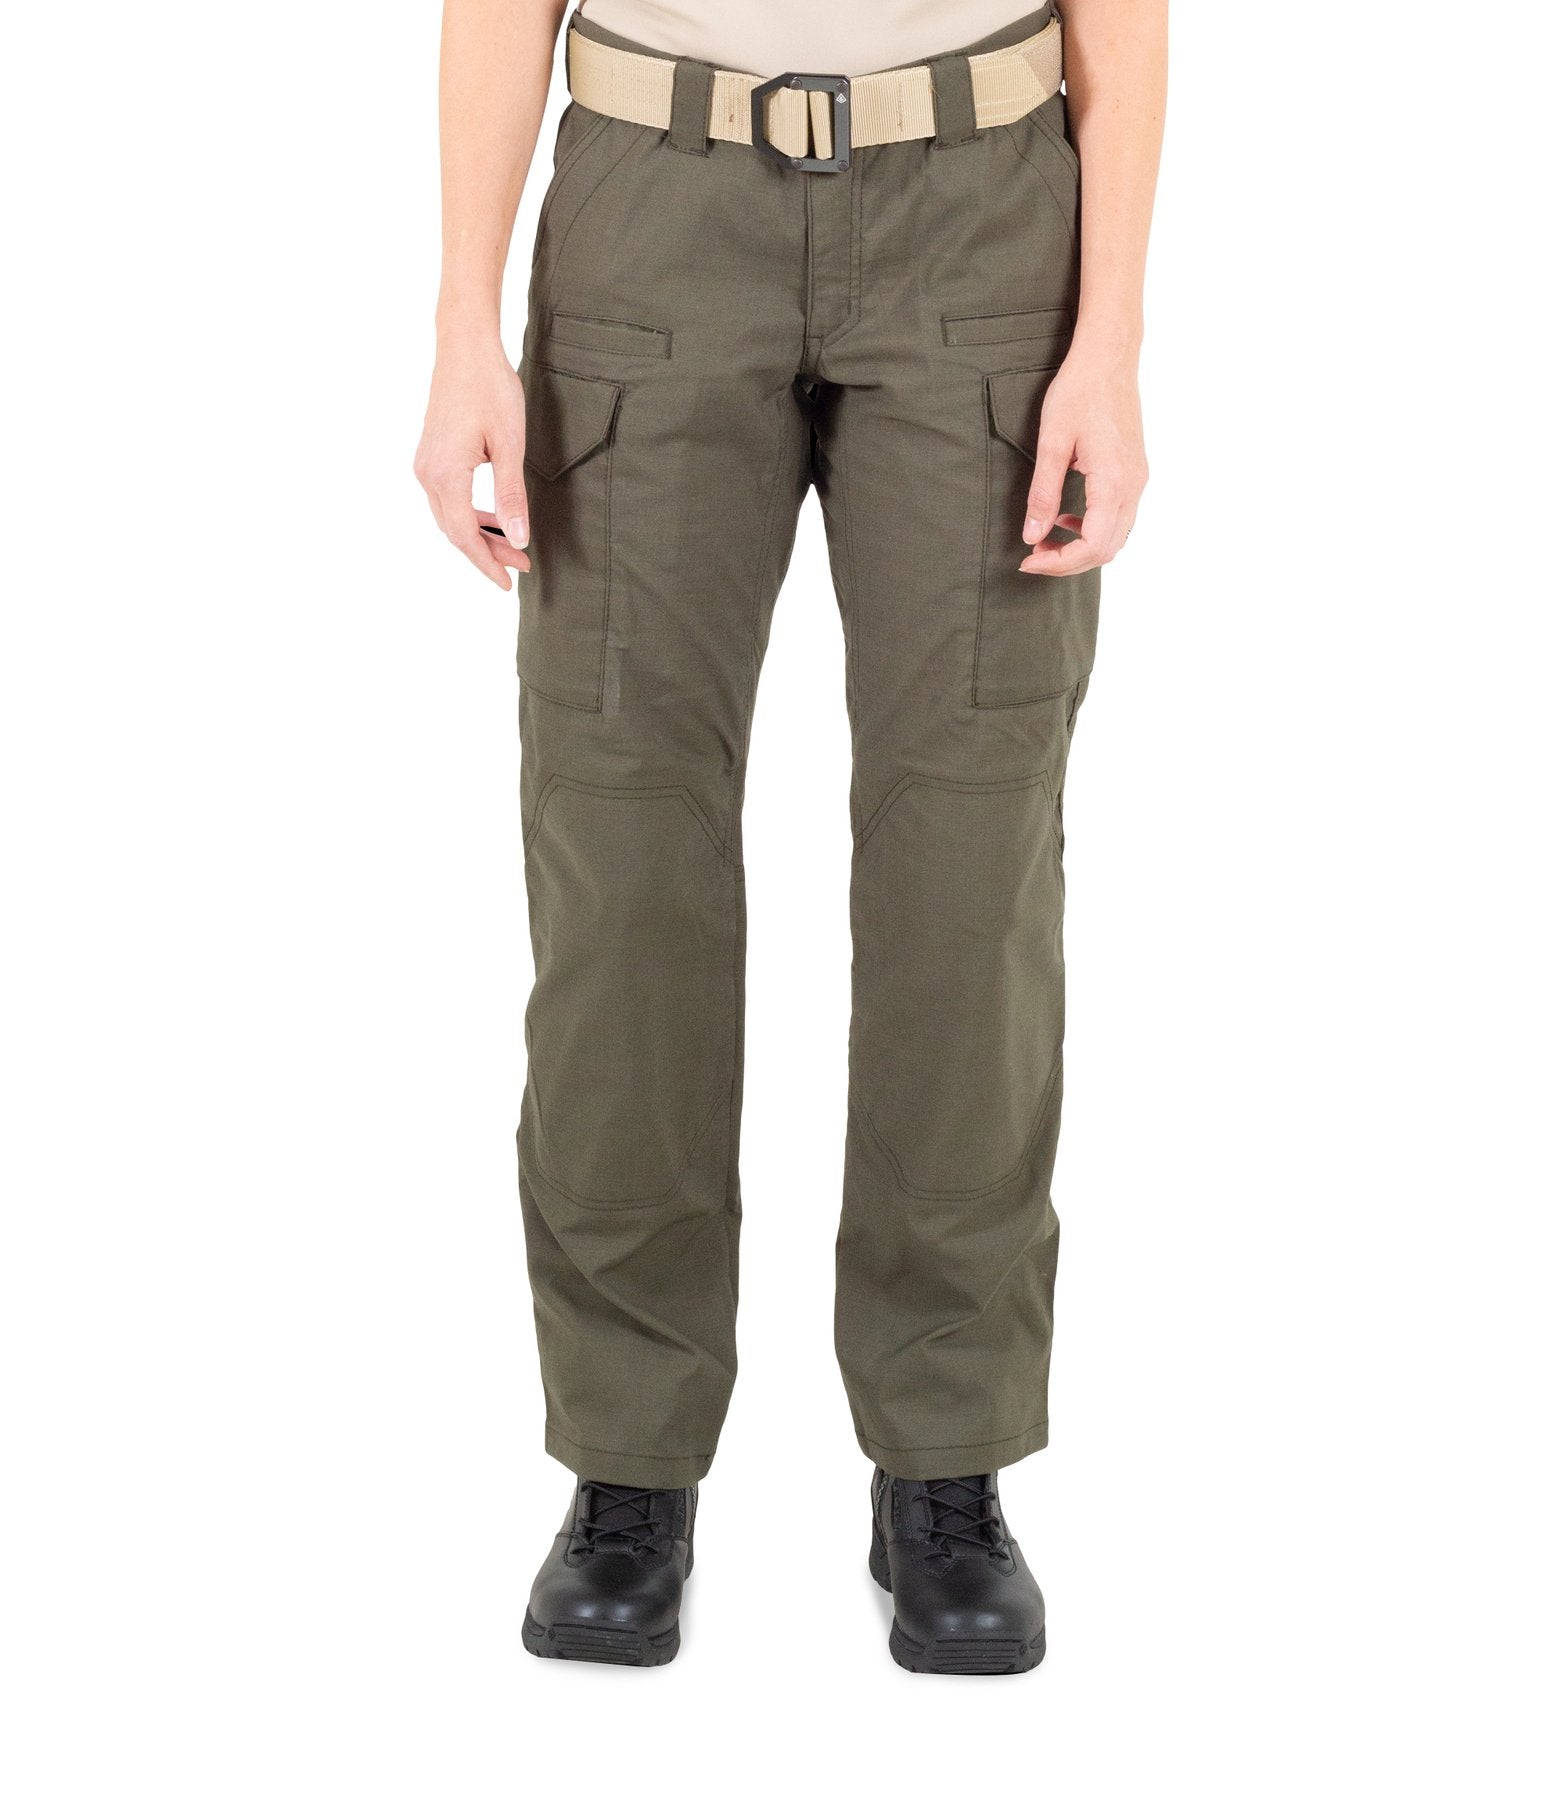 First Tactical V2 Tactical Pants - Women's